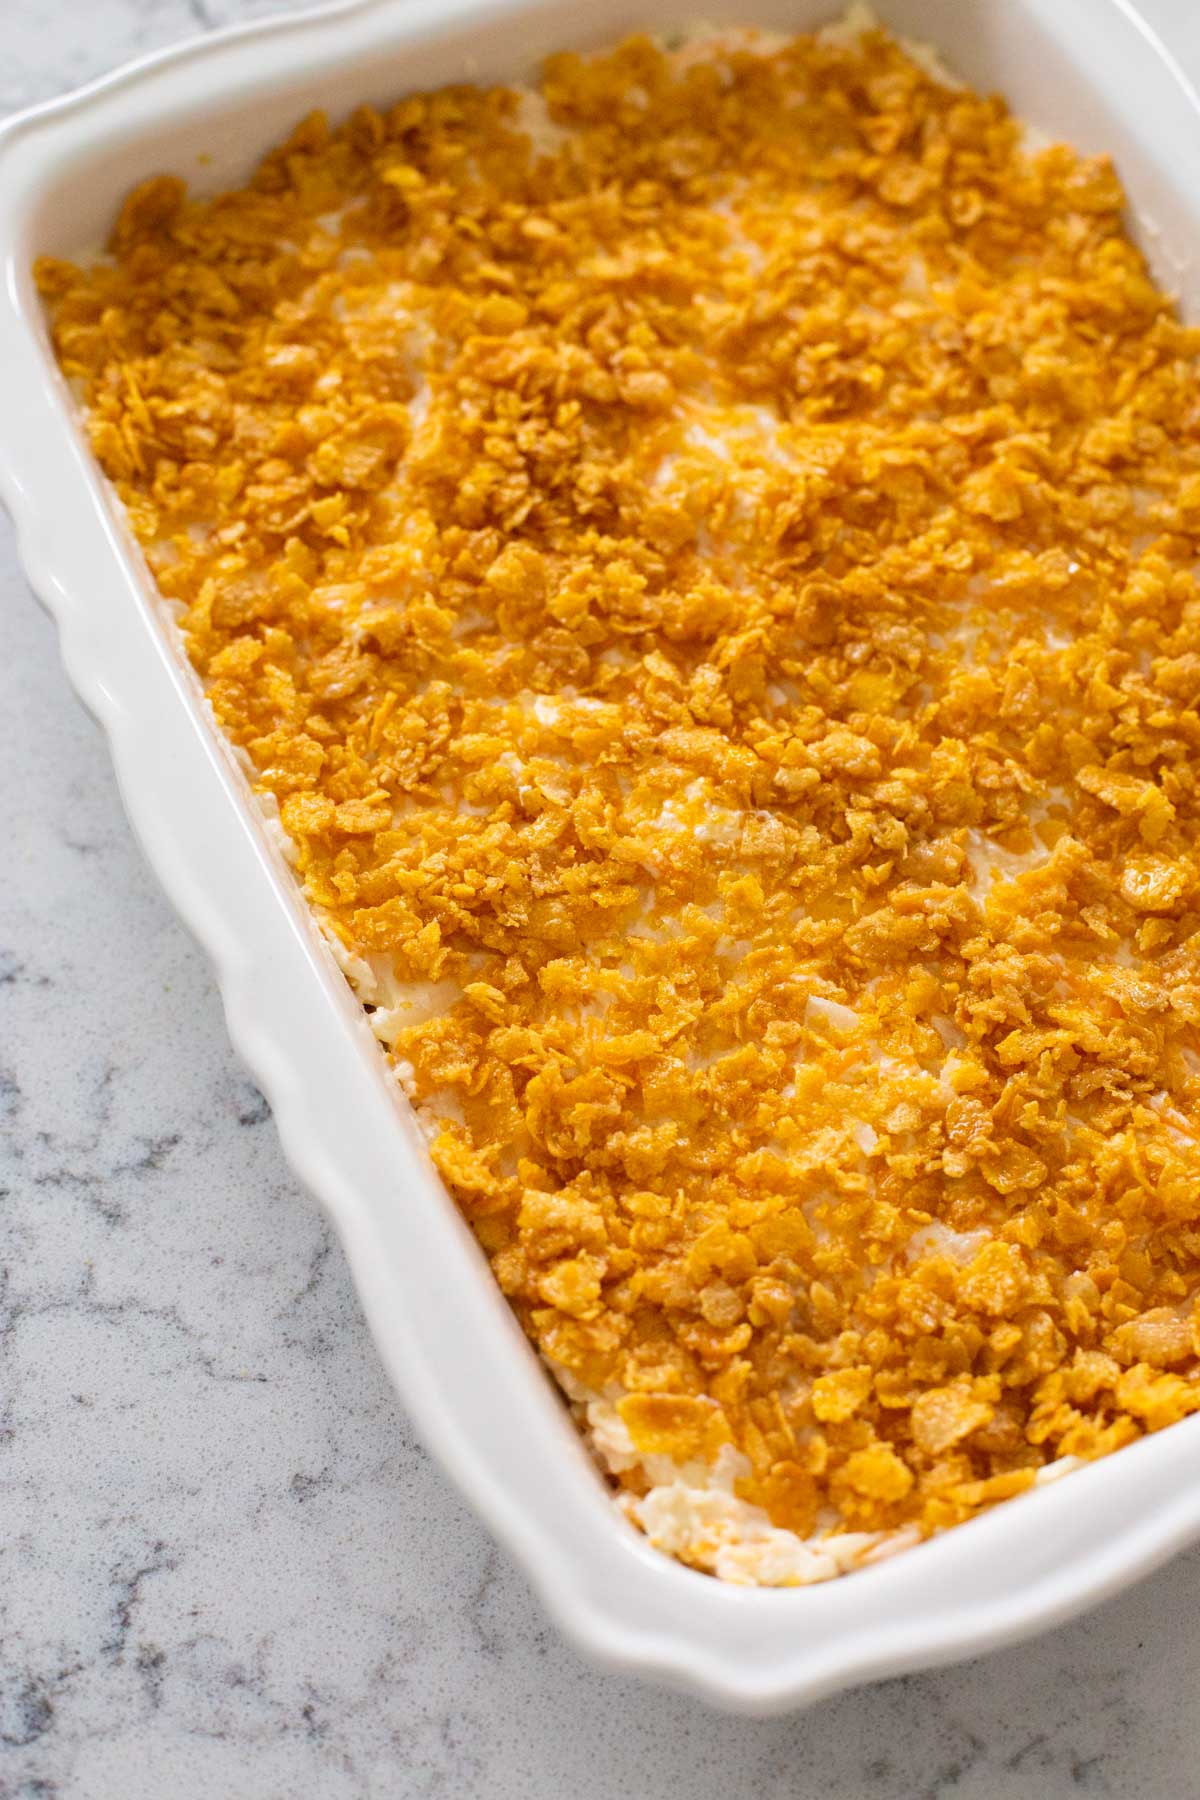 The potato casserole has been topped with cornflakes and baked in a 9 x 13 inch baking pan.